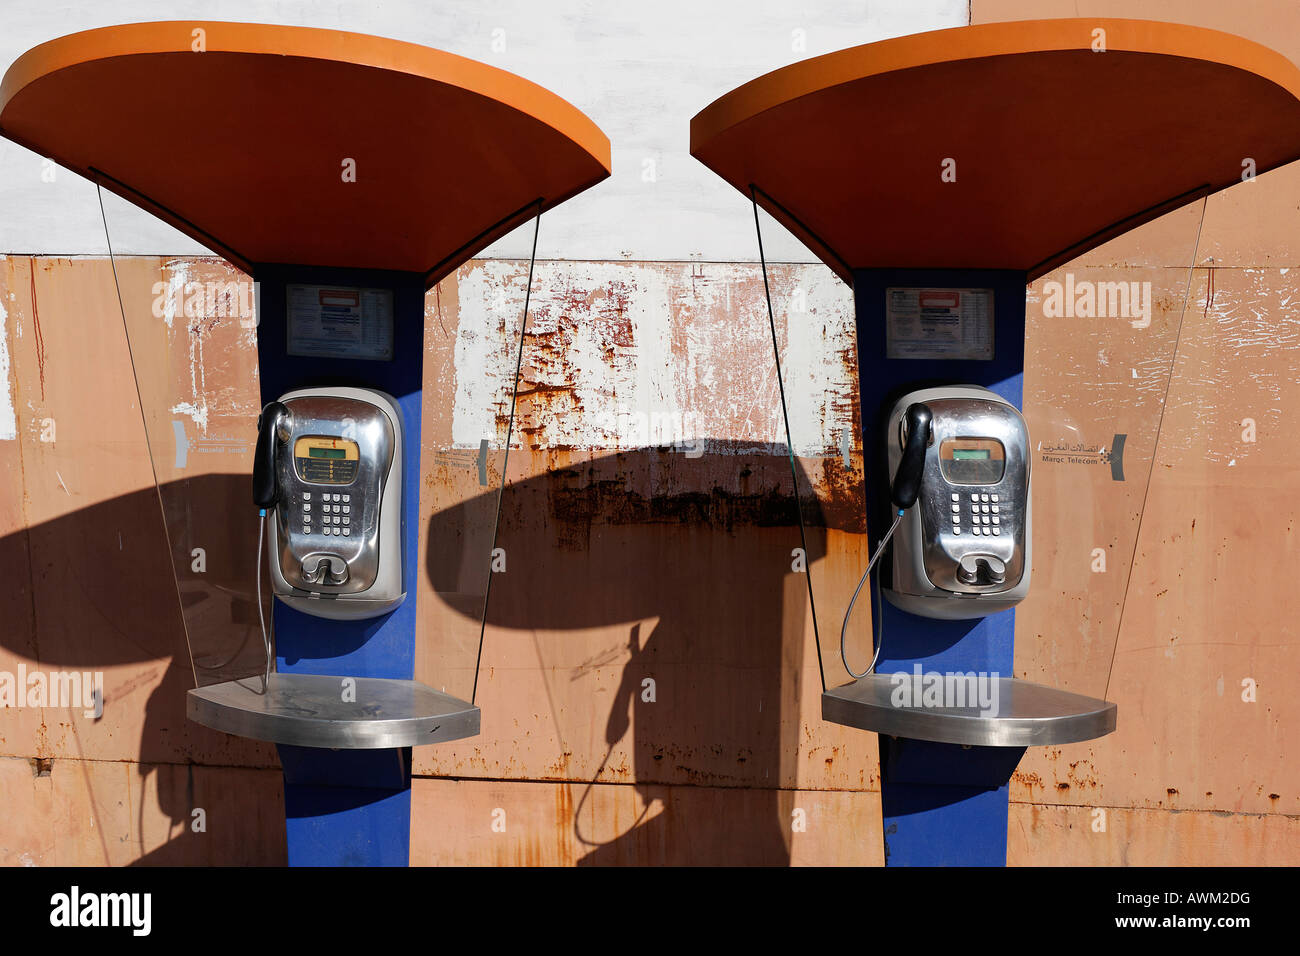 Two modern Maroc Telecom payphones, new part of the city, Marrakesh, Morocco, Africa Stock Photo